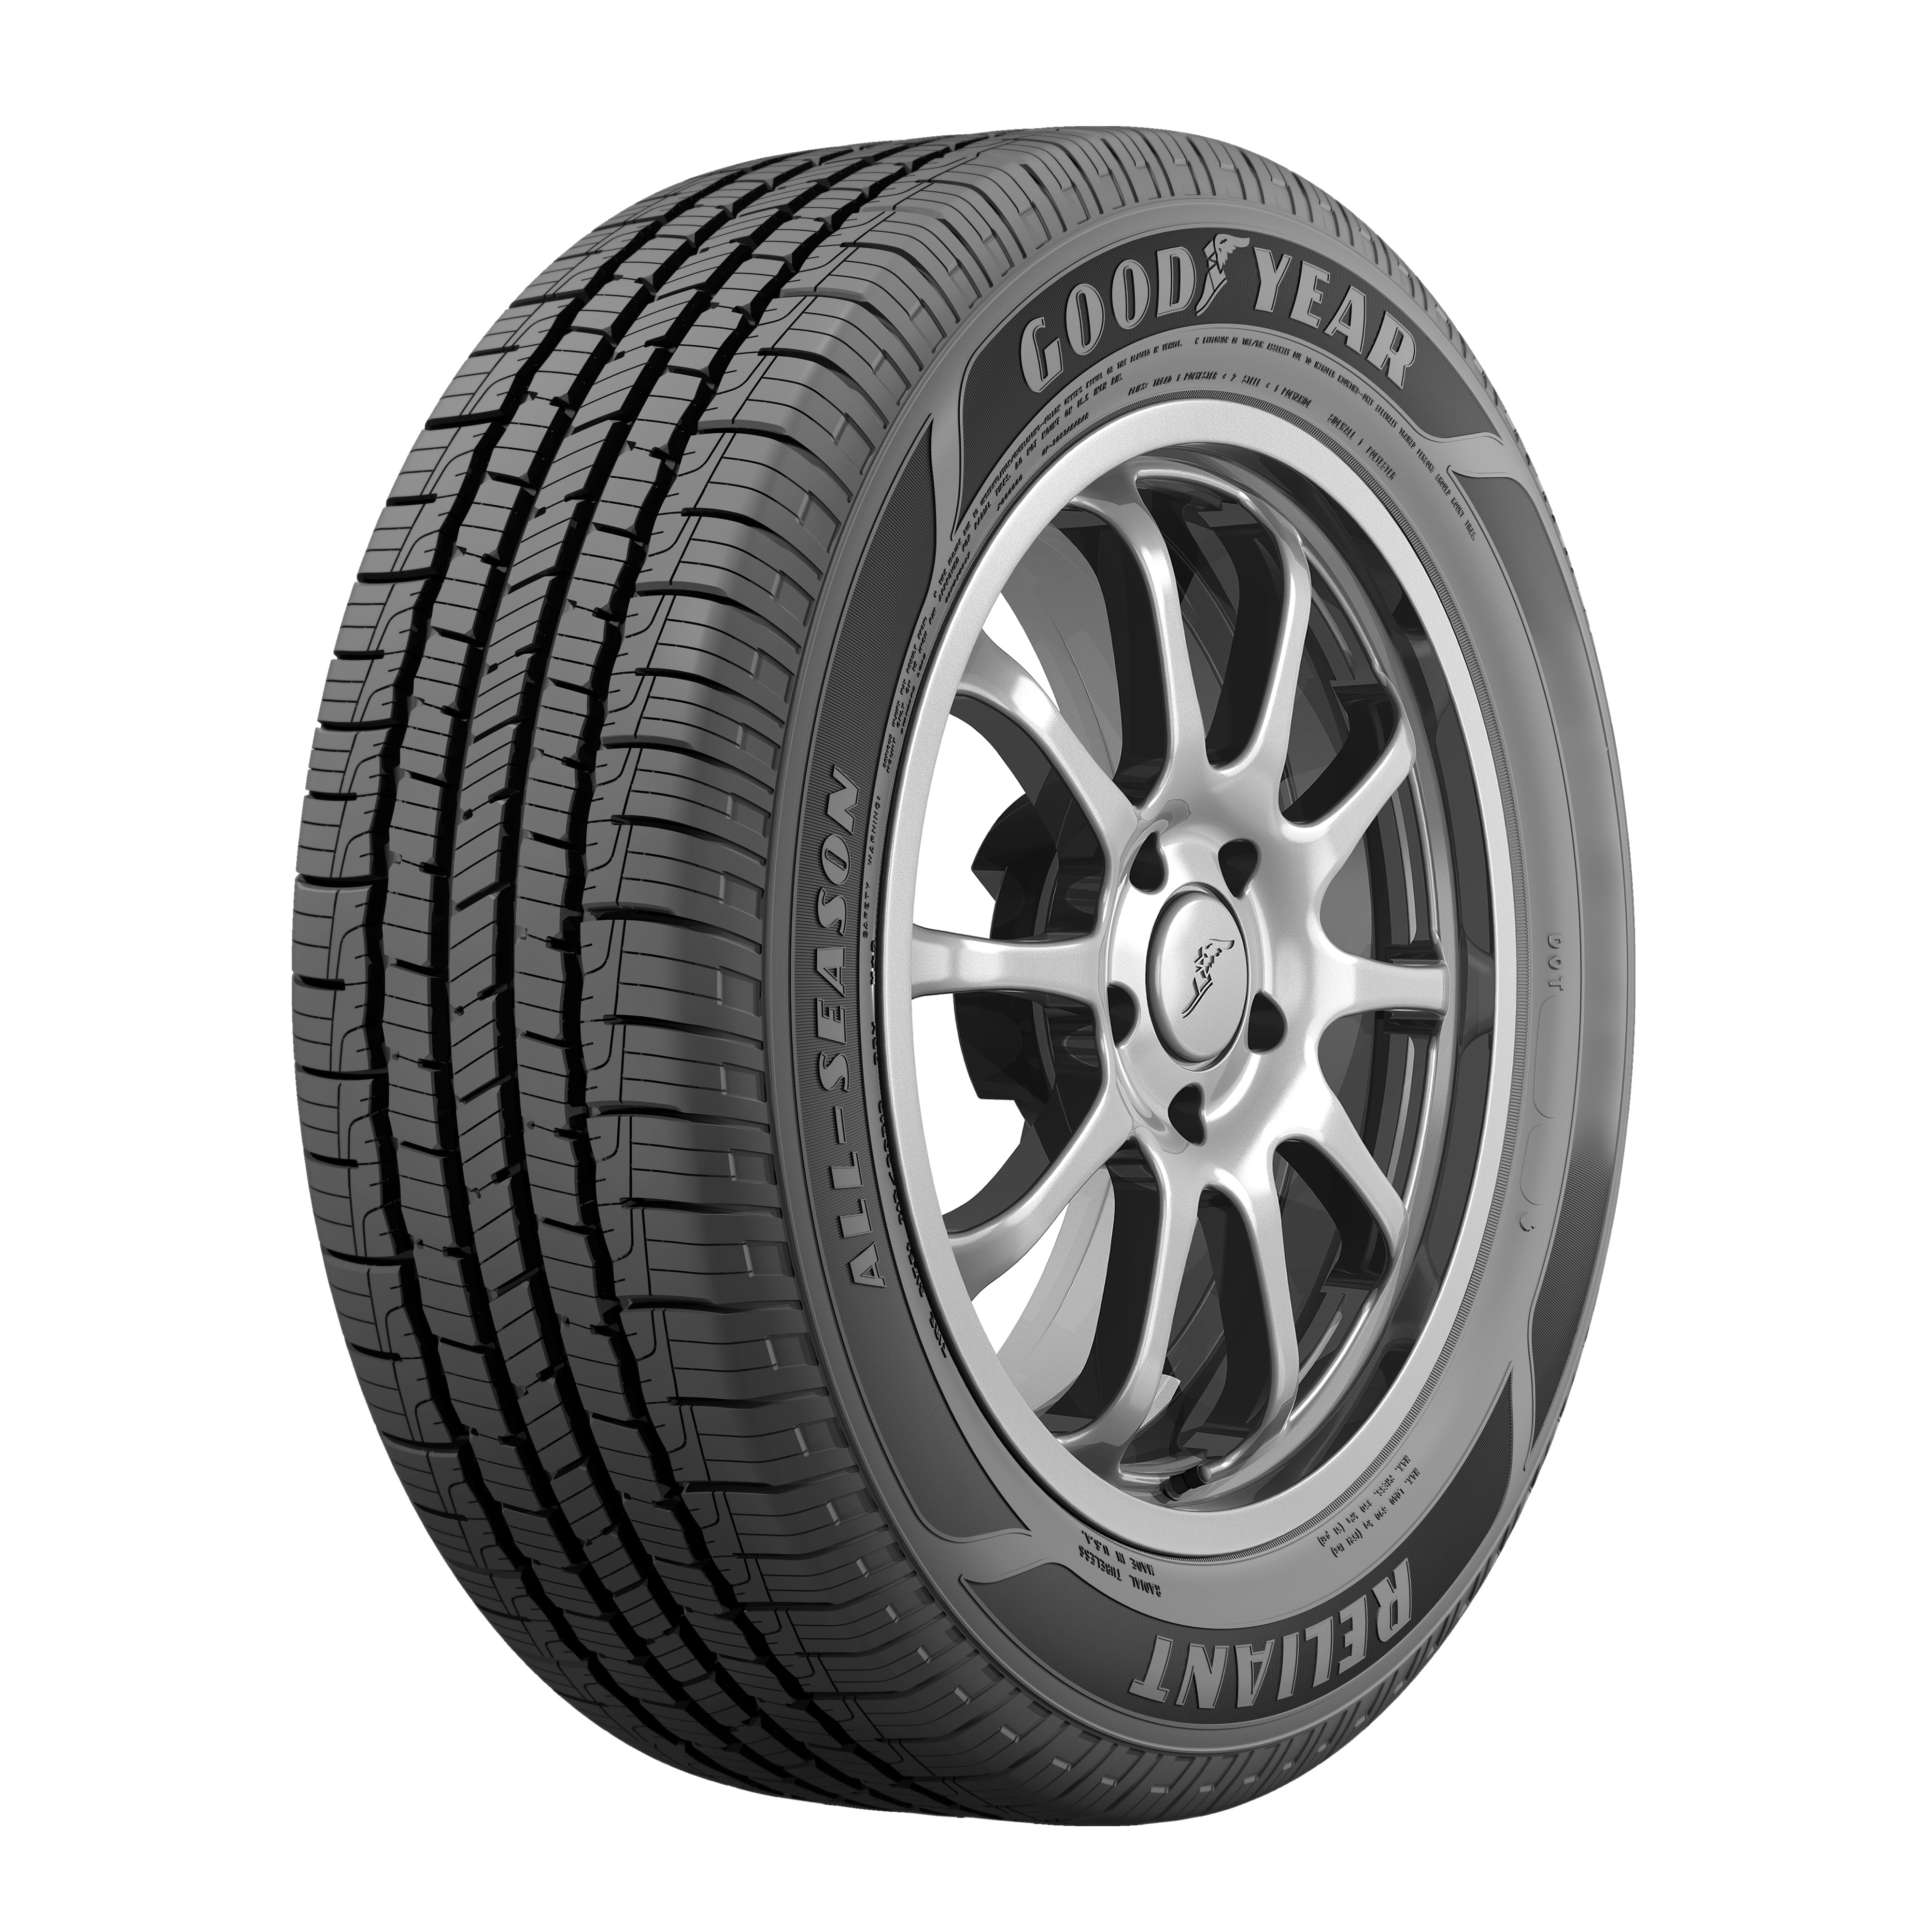 IRONMAN GR906 Touring Radial Tire 205/60-15 91H 